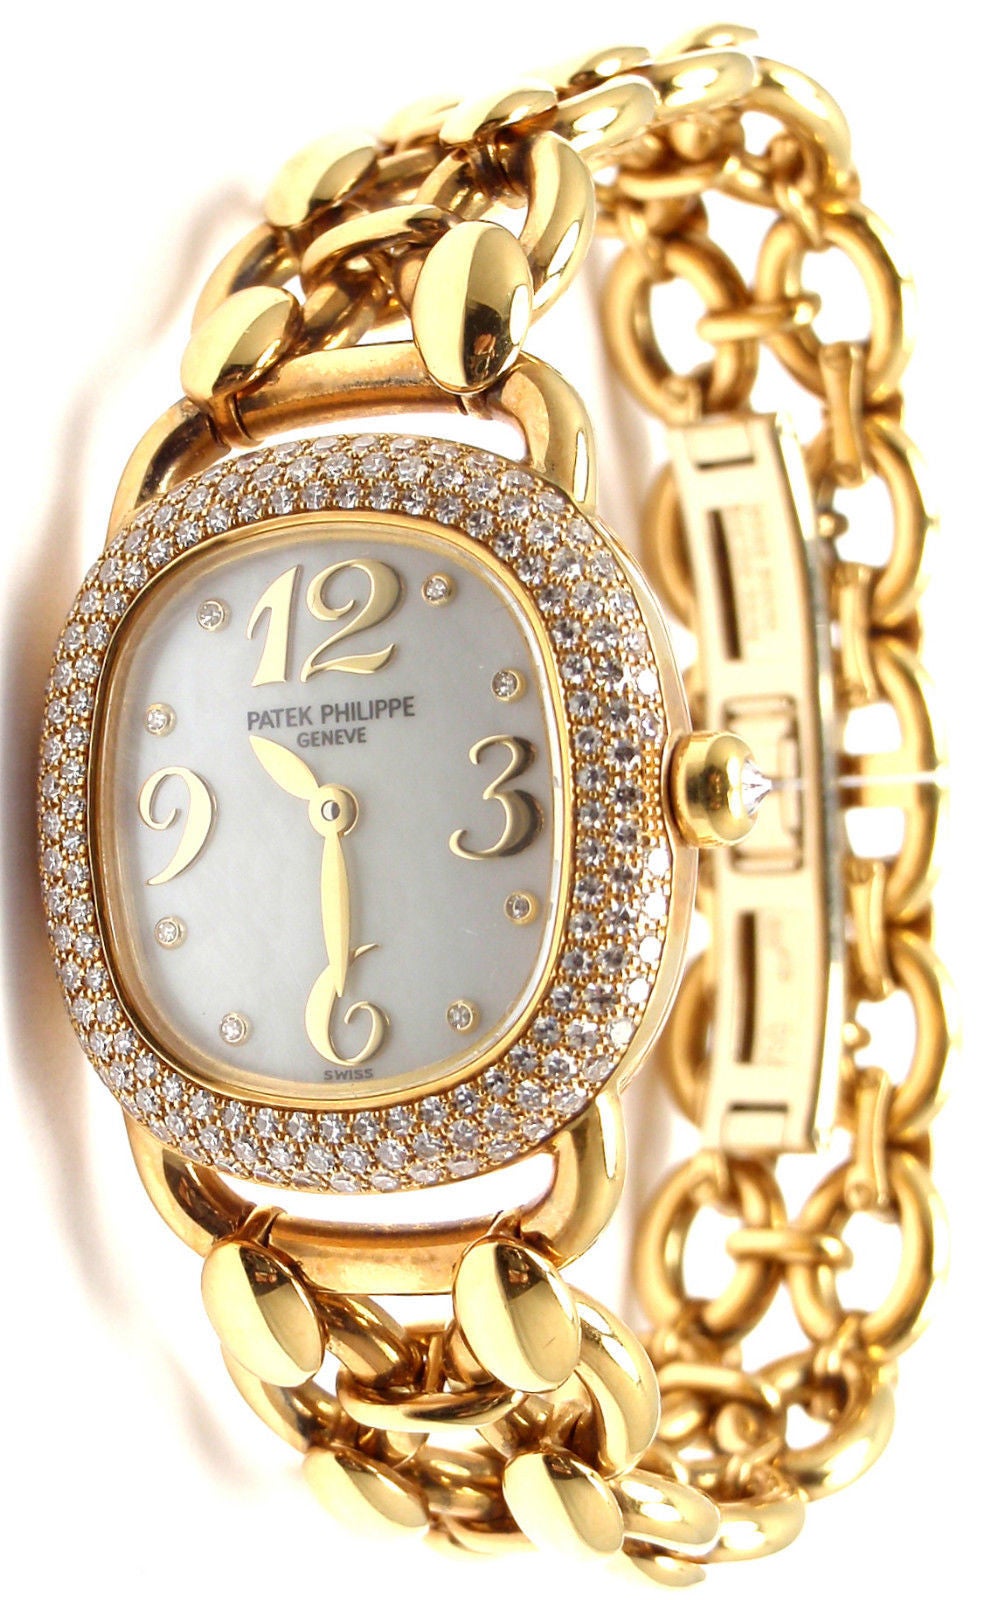 Patek Philippe Golden Ellipse Lady's 18k Yellow Gold Diamond Watch, 
Reference 4831.

This watch is unworn and comes with all the papers and a PP box.

With 160 diamonds VVS1 clarity, E color total weight .92ct

Movement: Original Patek